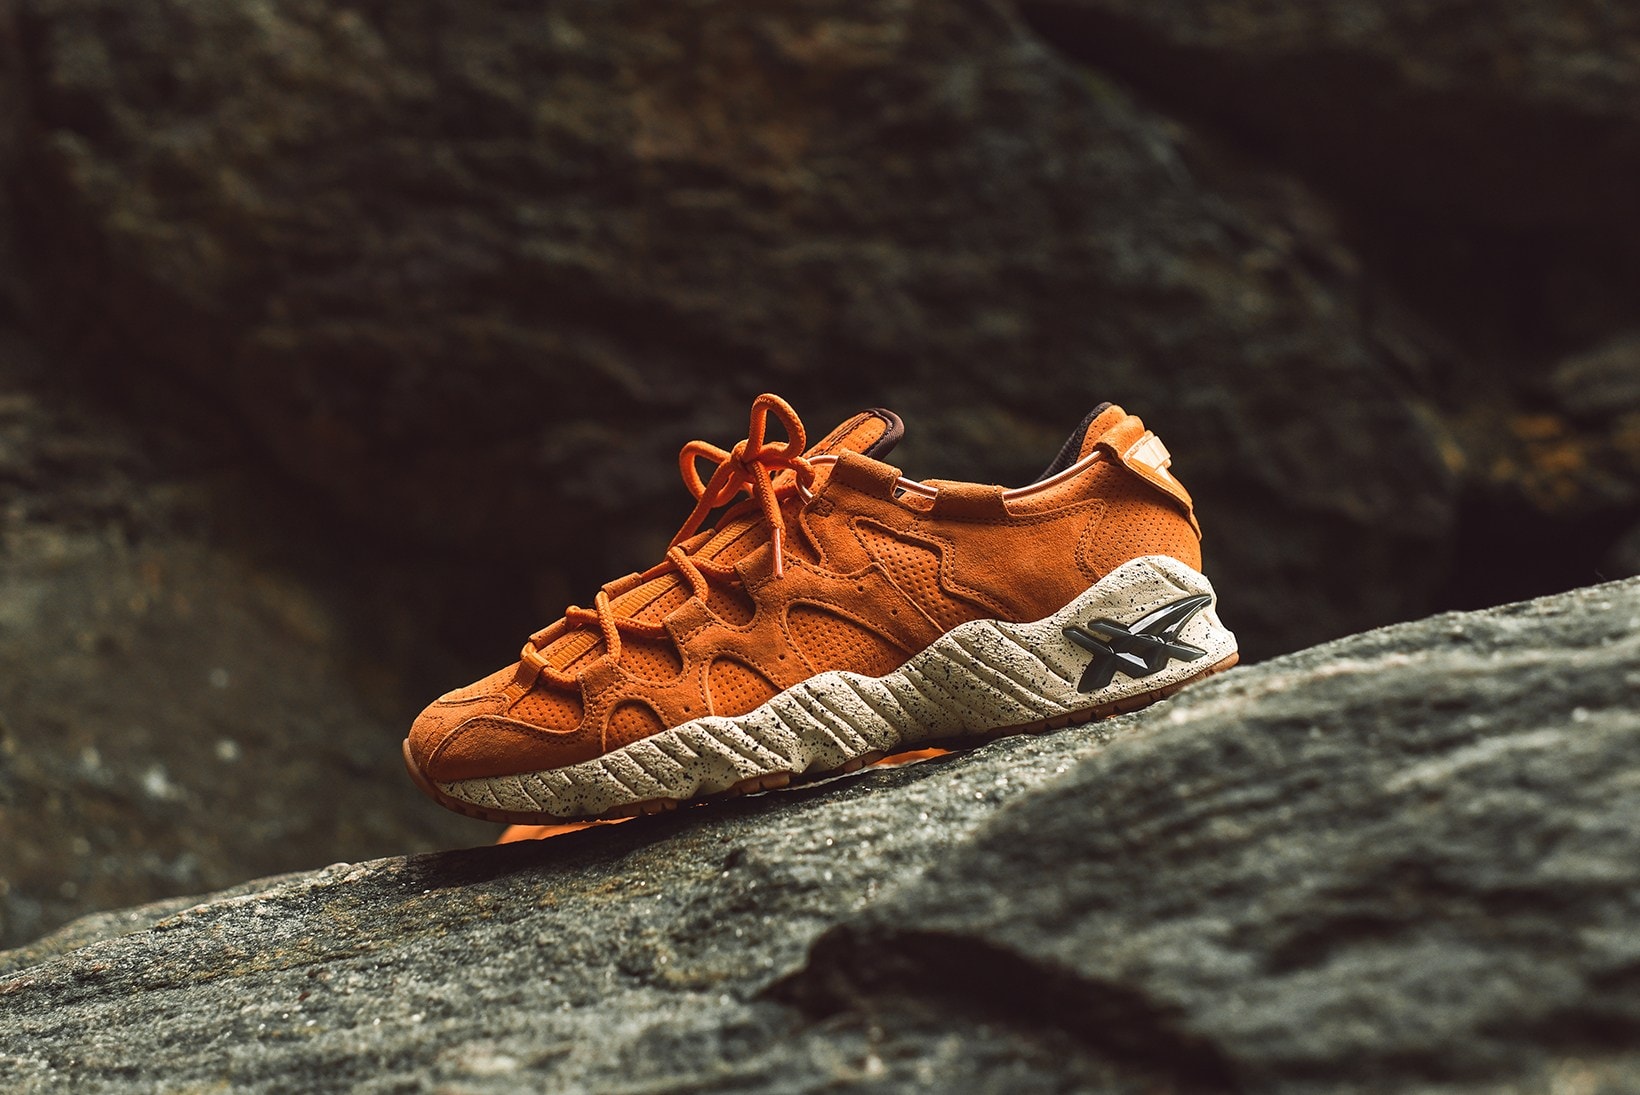 KITH & Ronnie Fieg x ASICS Tiger "Legends Day" Collection